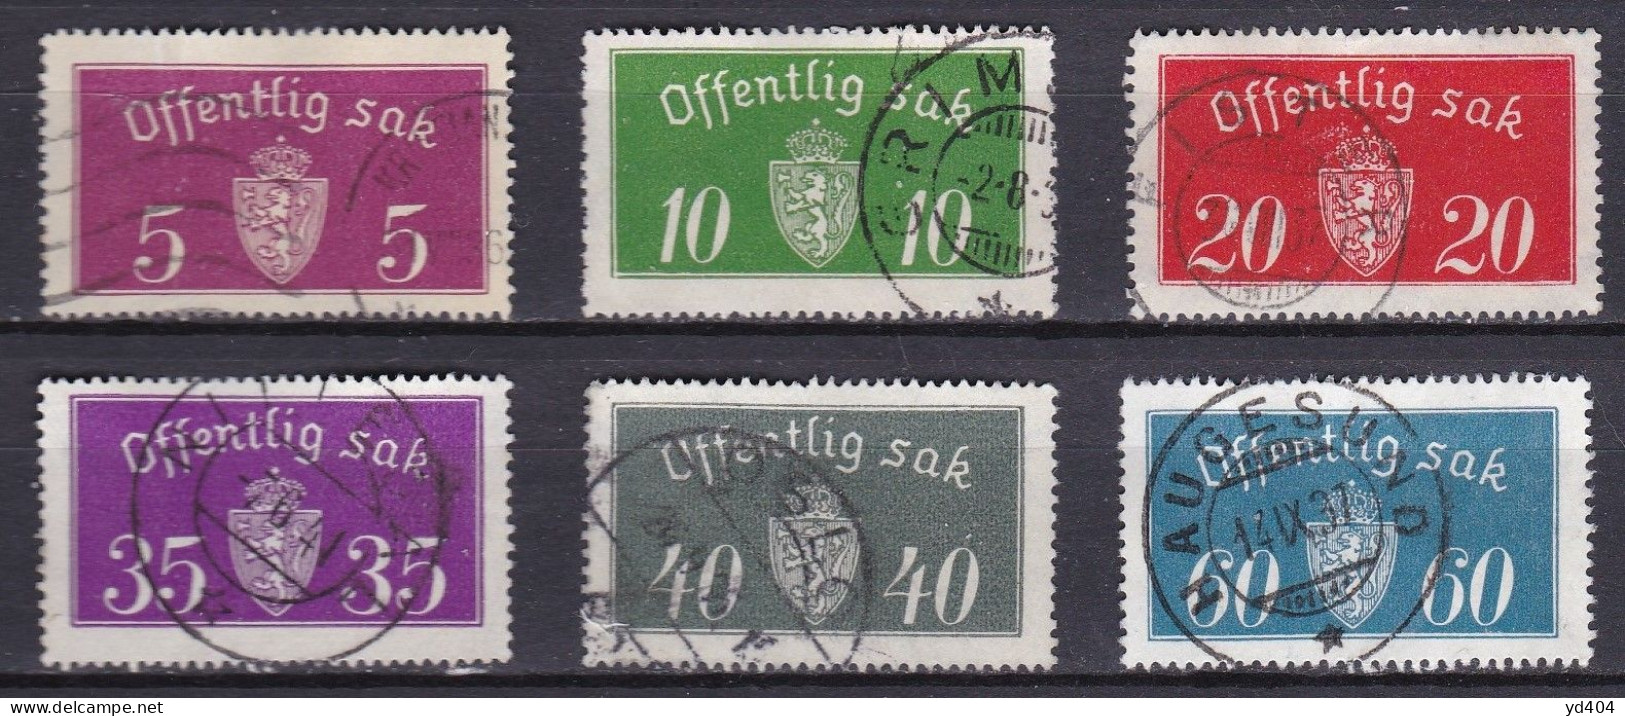 NO601C – NORVEGE - NORWAY – 1933 – COAT OF ARMS – SC # O10a19a USED 8 € - Service